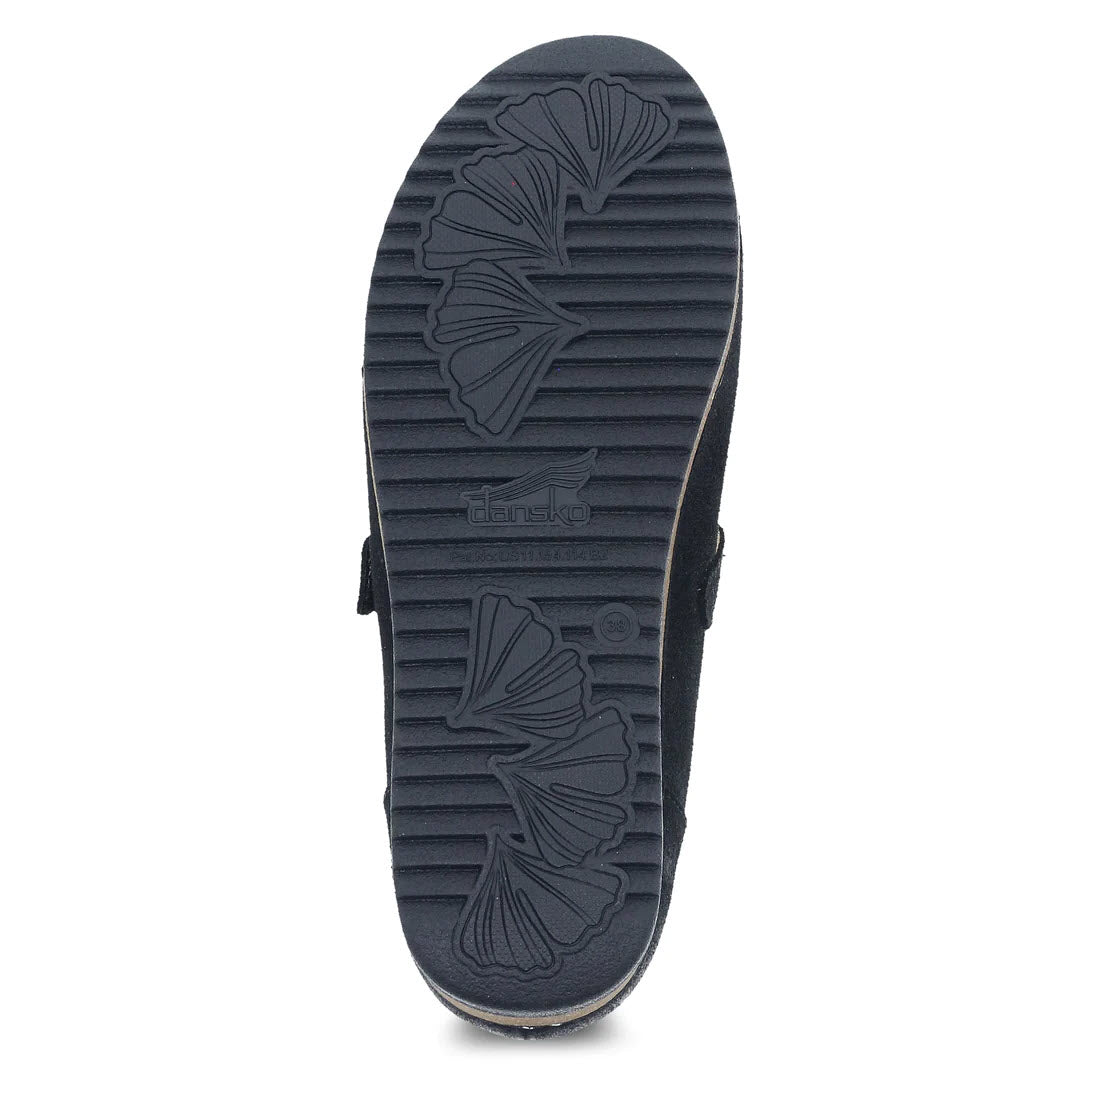 Bottom view of a single navy blue Dansko Mary Jane sandal showing a detailed tread pattern and the brand logo &quot;Dansko&quot;.